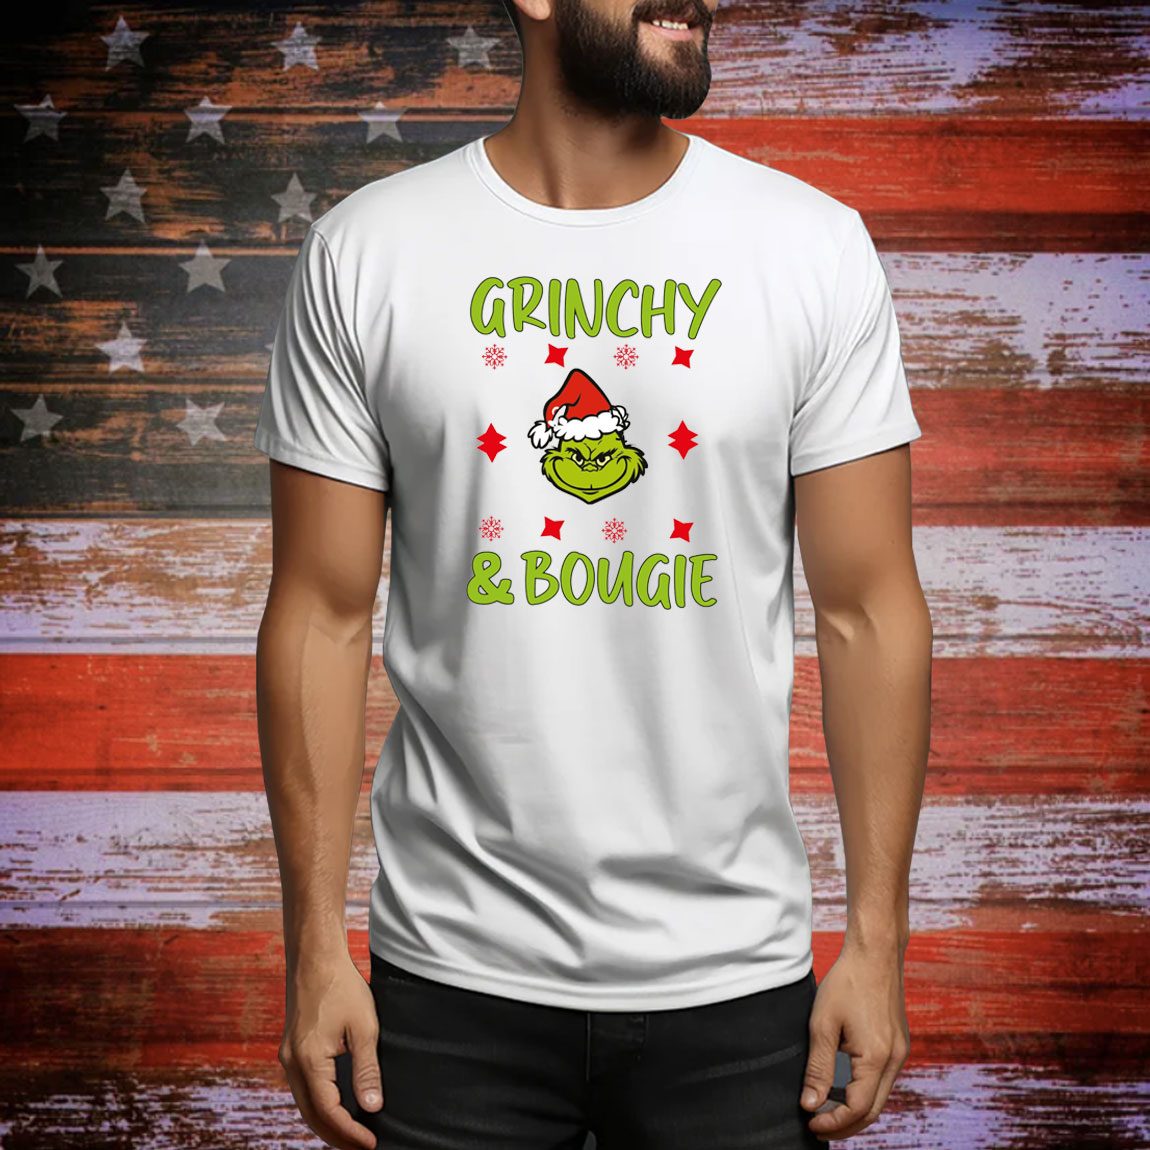 https://hollytees.com/wp-content/uploads/2023/12/Mean-Green-Guy-Christmas-Stanley-TumblerGrinchy-And-Bougie-Grinch-Christmas-Sweatshirt.jpg